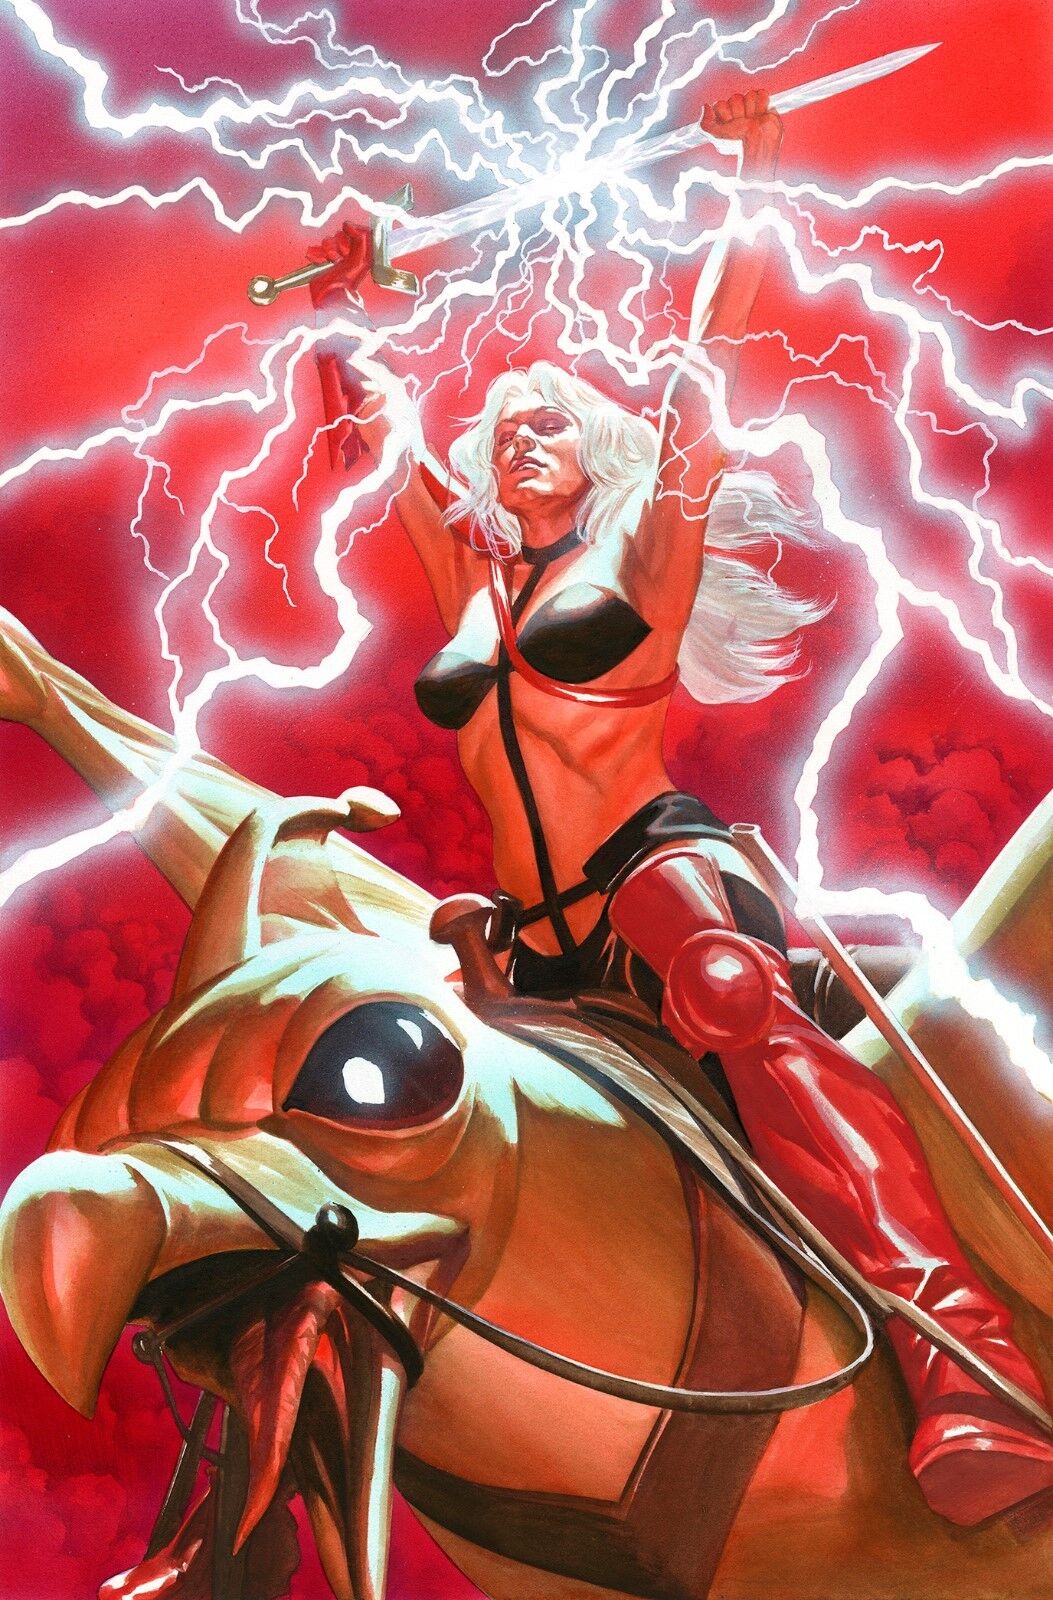 ALEX ROSS rare HEAVY METAL: TAARNA #22 paper giclee SIGNED NEW SDCC 2017 